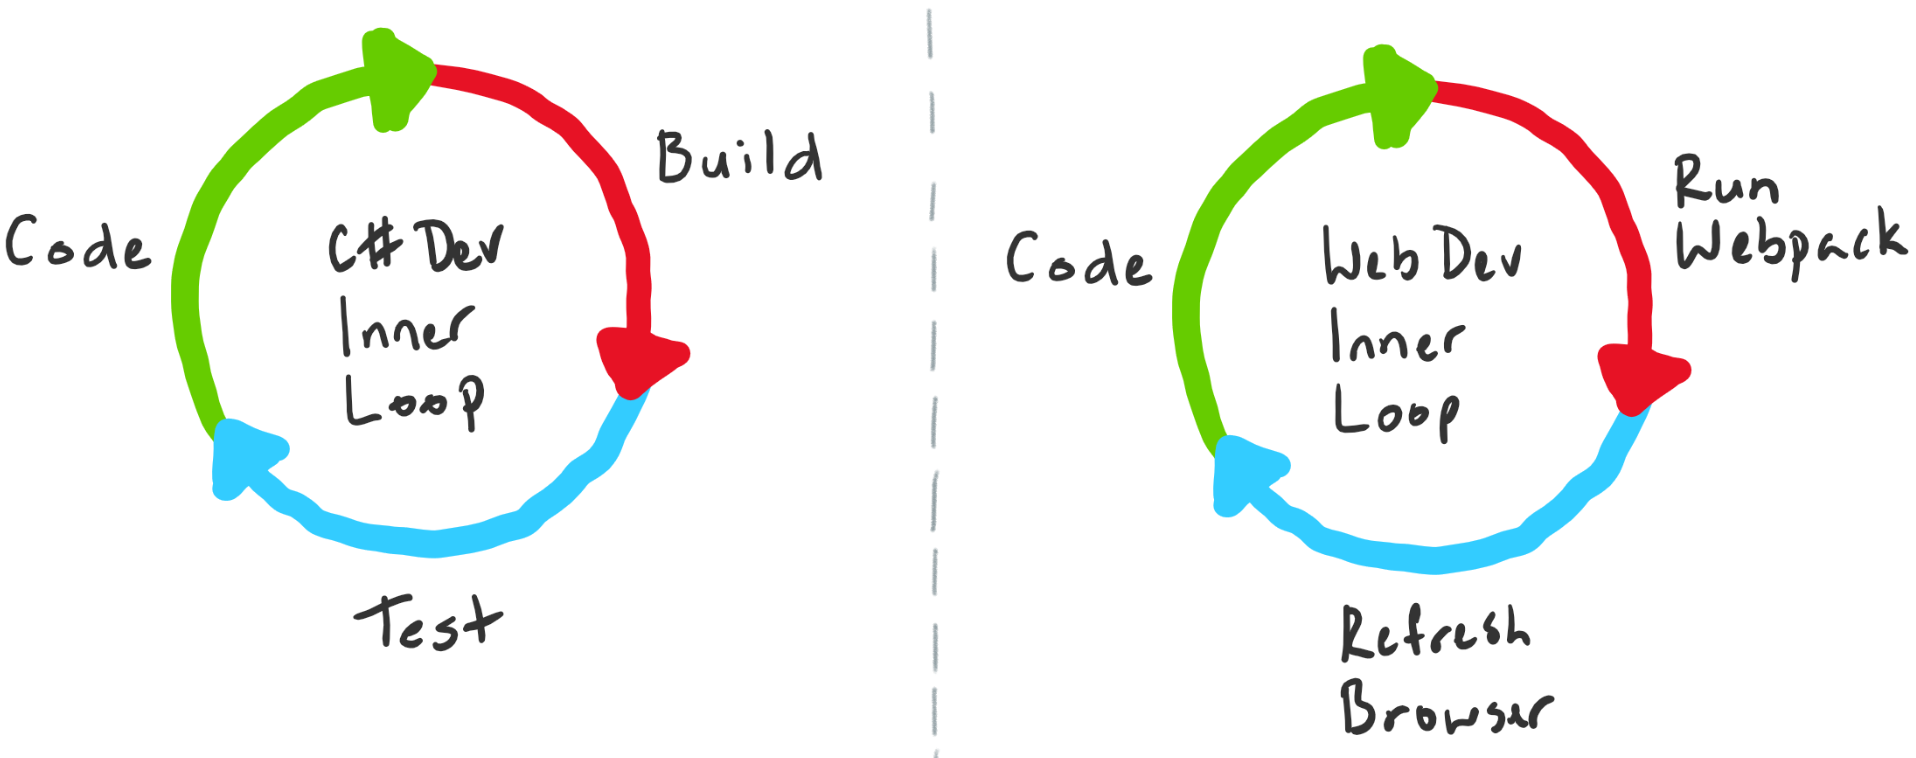 Diagram showing different Inner Loops like code, build and test.